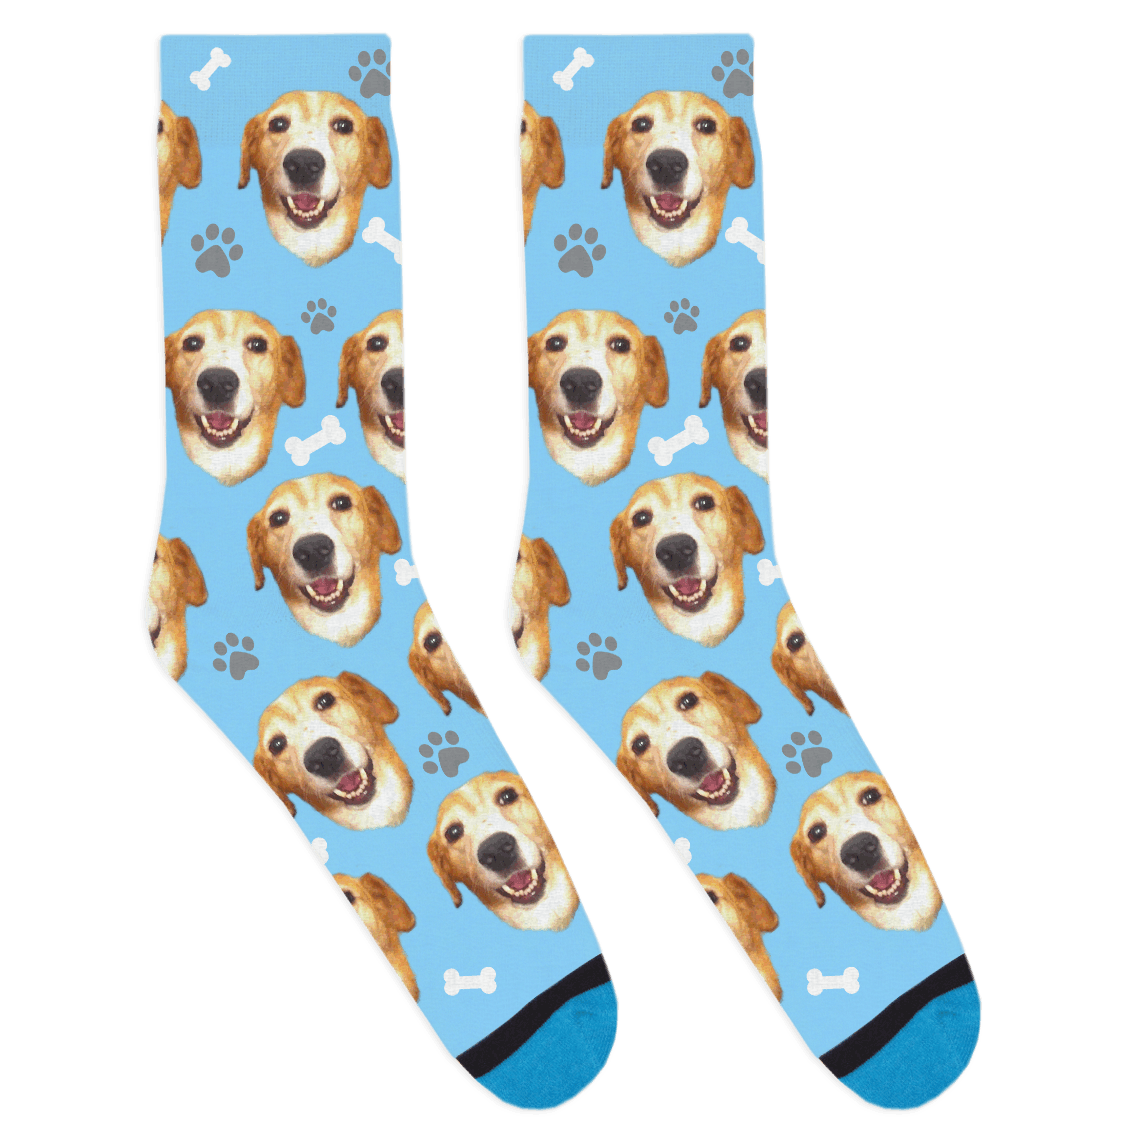 Father's Day Patterned Socks From The Dog